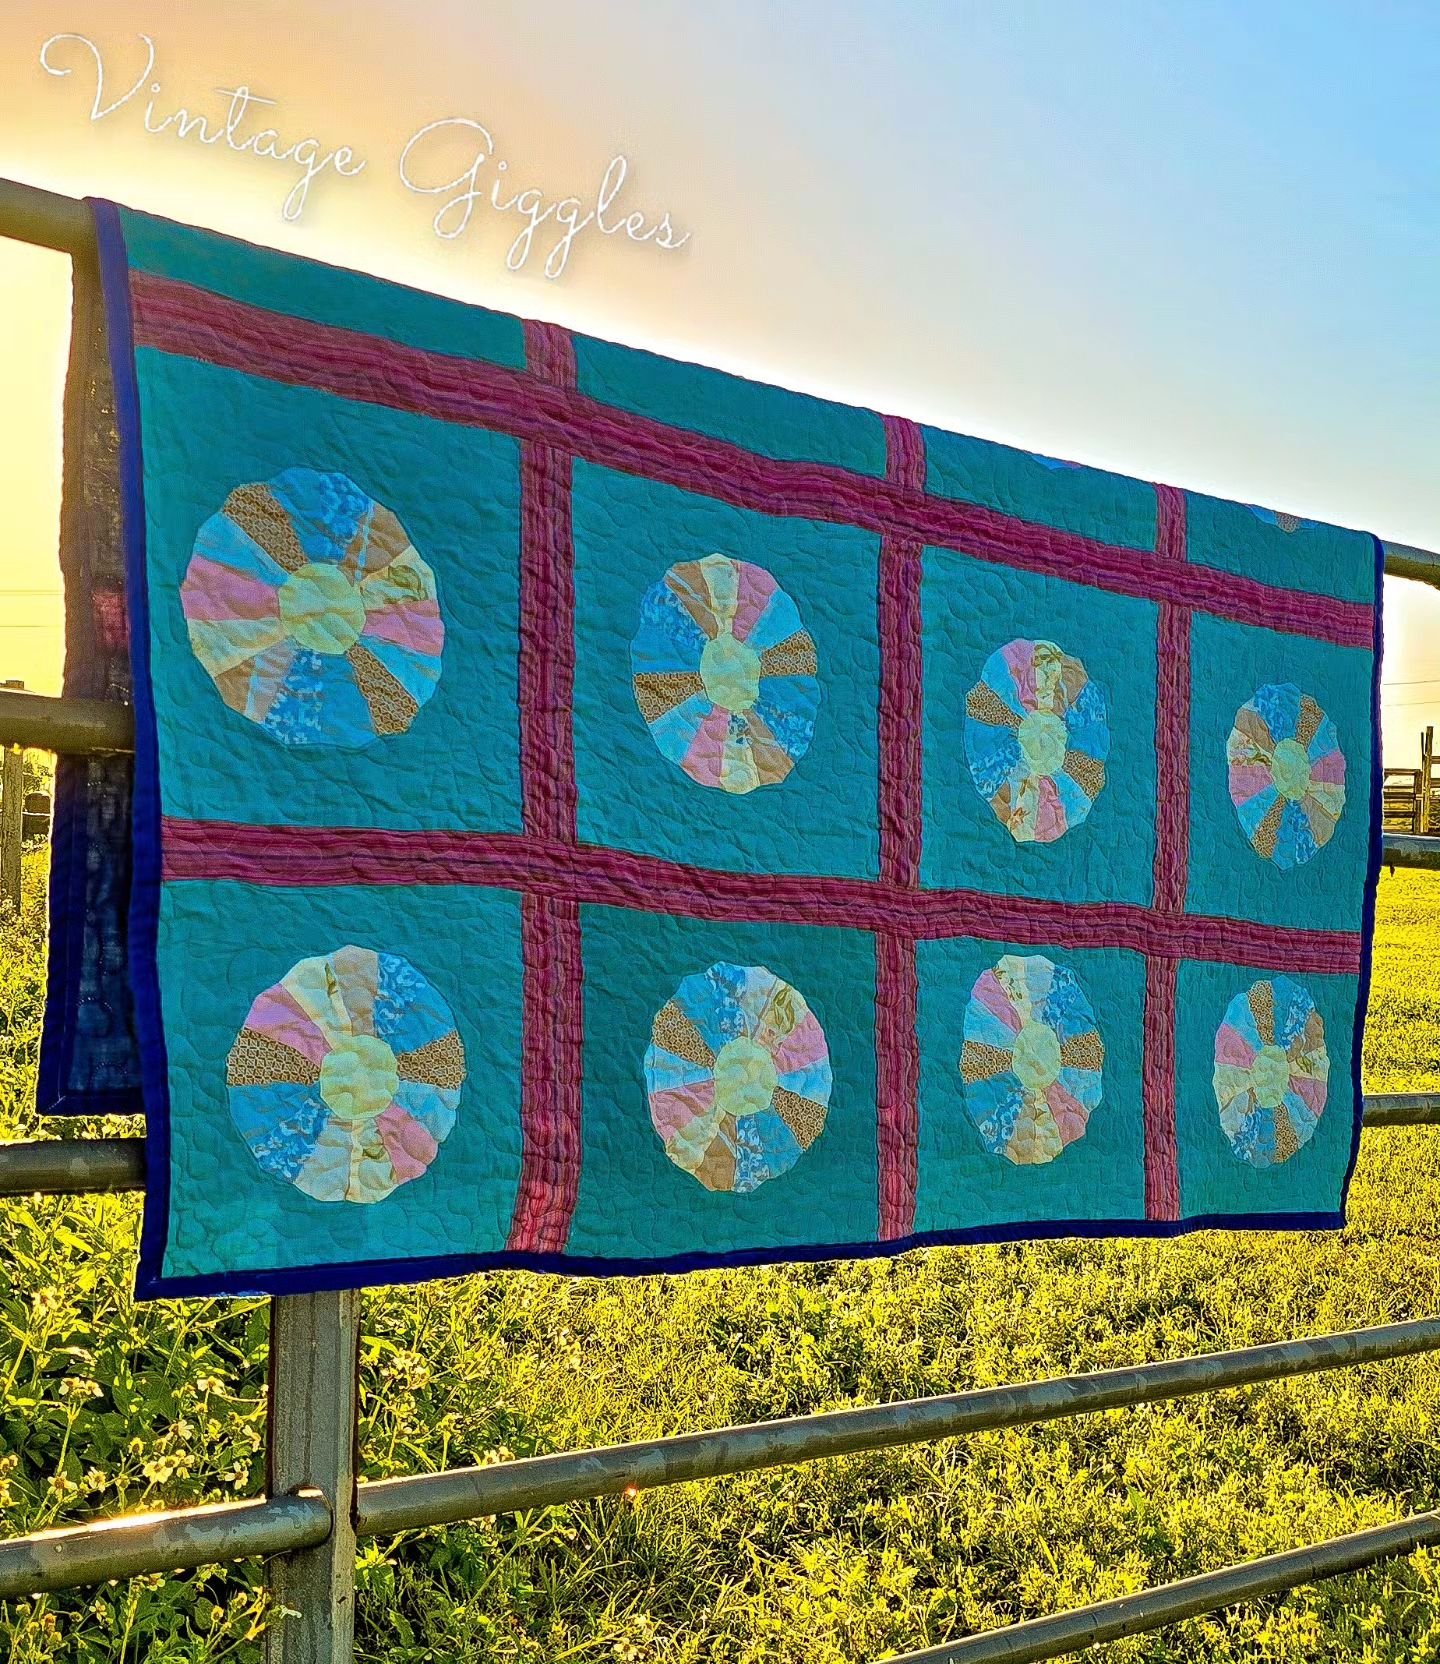 Remember #thisvintagegigglesquilt ?  It was sent to us as a well loved quilt from her childhood, but it has been torn and began to fall apart.  She asked if we can restore it to be usable again. 

We take restorations on an individual basis, because 